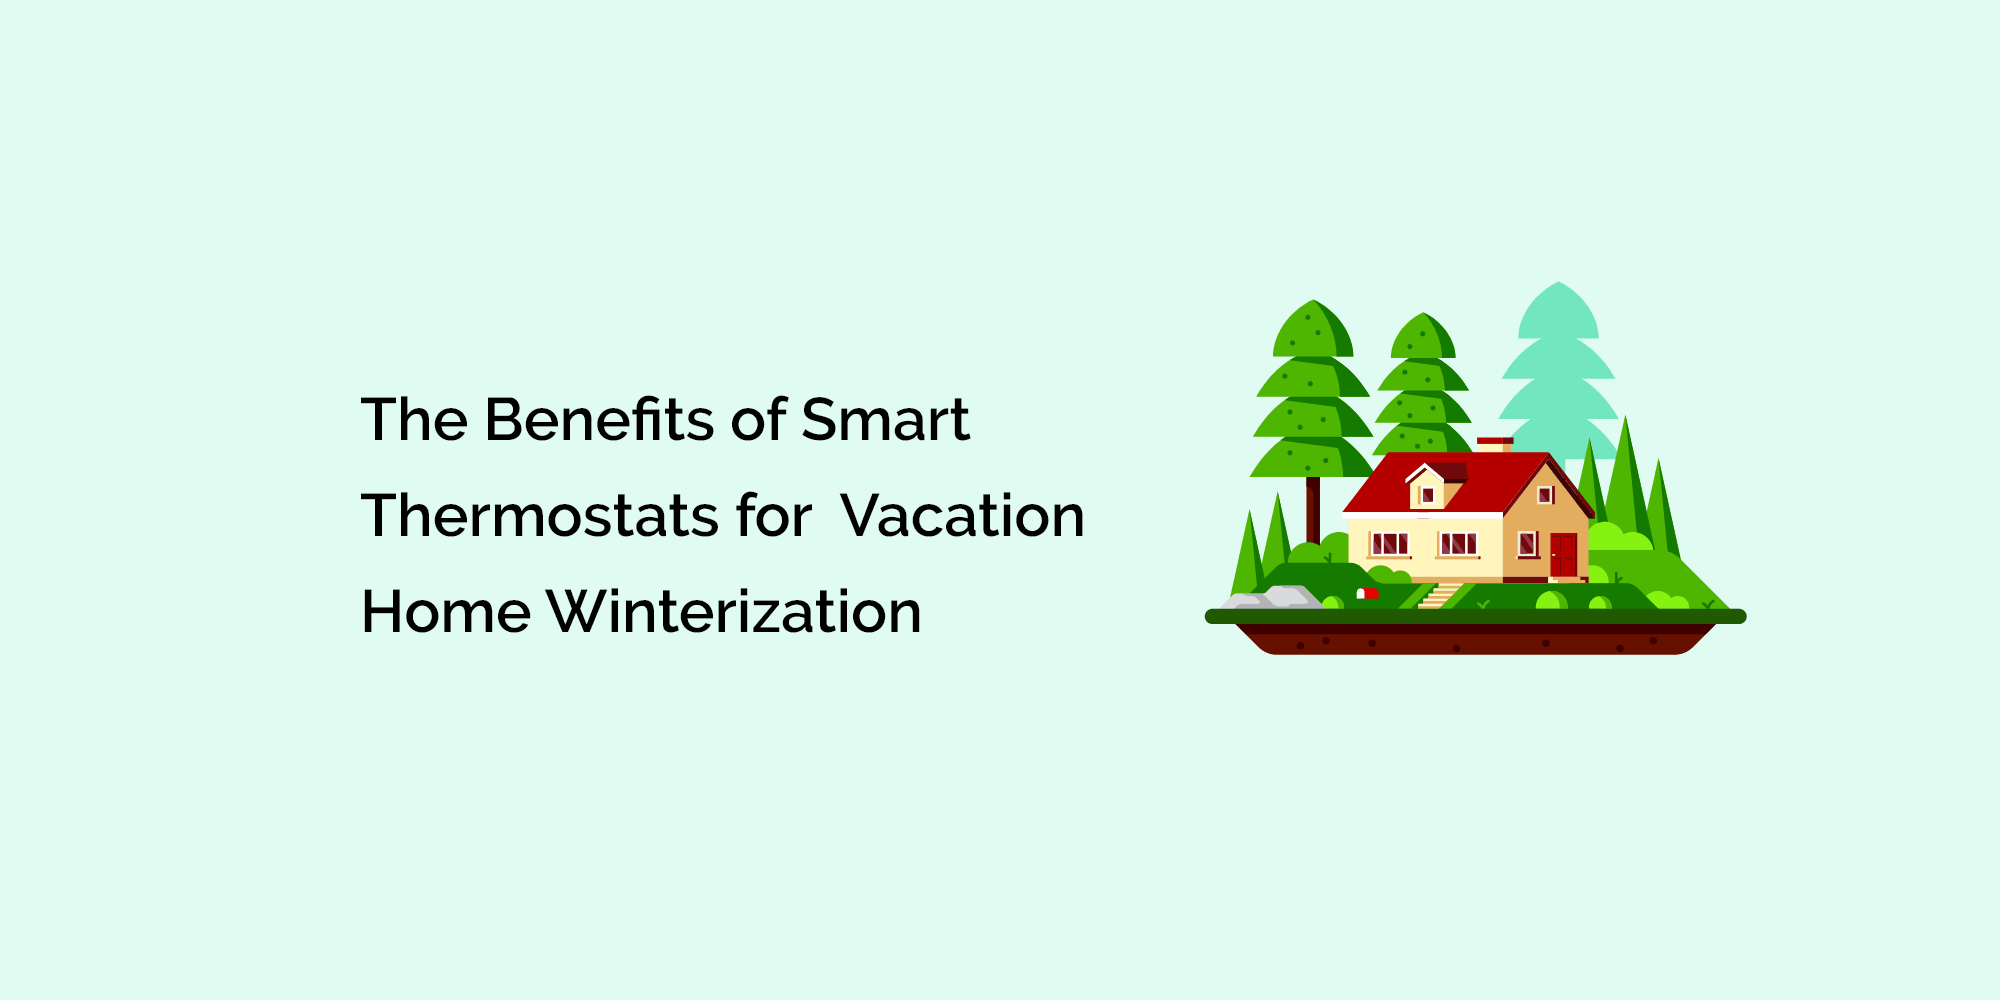 The Benefits of Smart Thermostats for Vacation Home Winterization